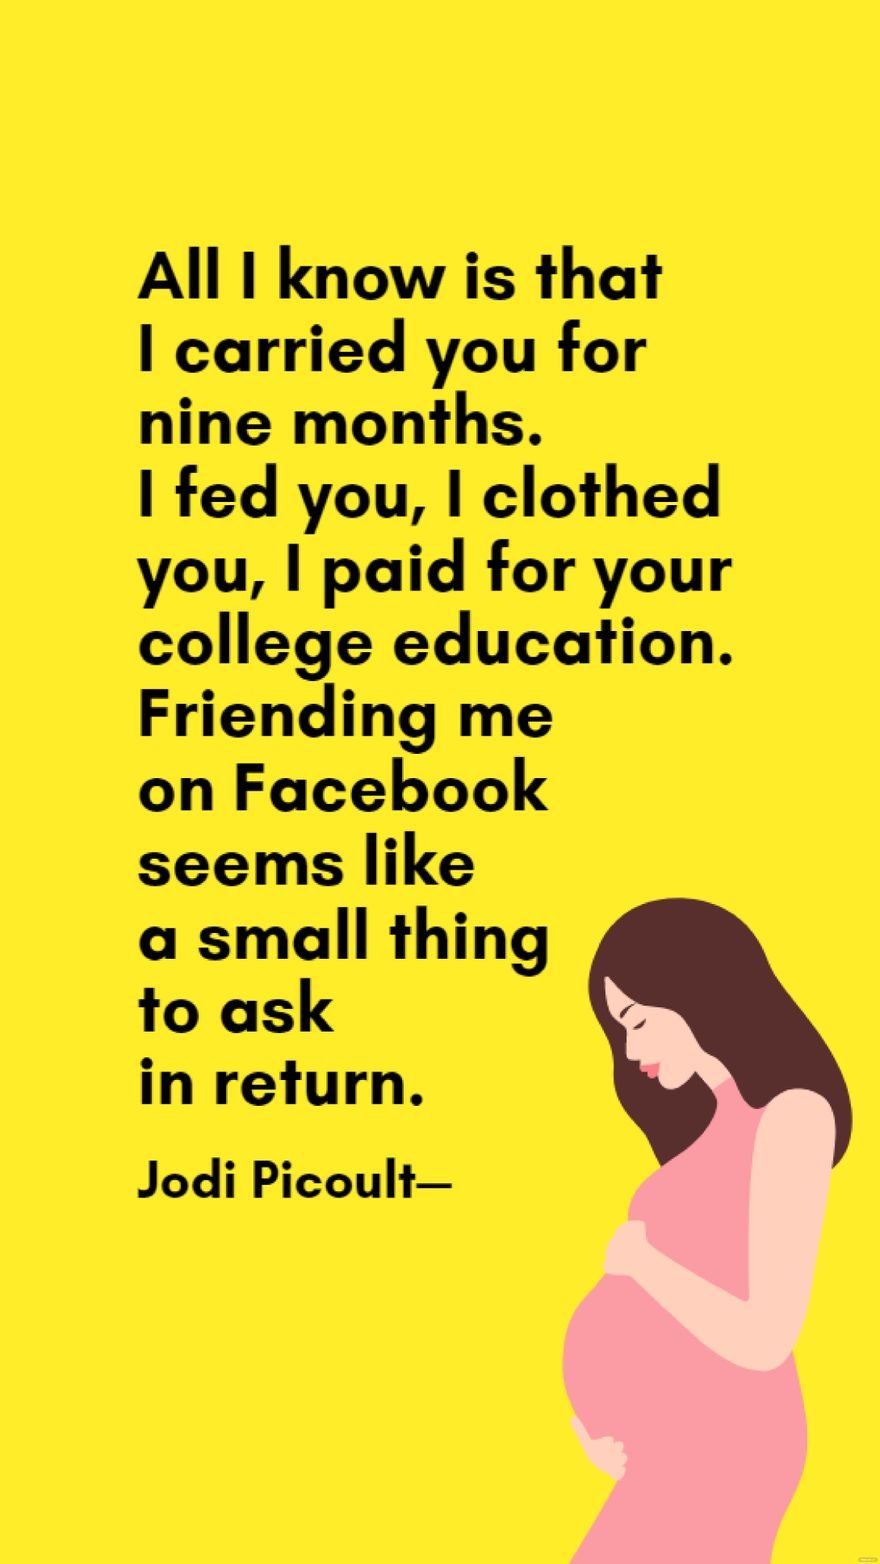 Free Jodi Picoult - All I know is that I carried you for nine months. I fed you, I clothed you, I paid for your college education. Friending me on Facebook seems like a small thing to ask in return.